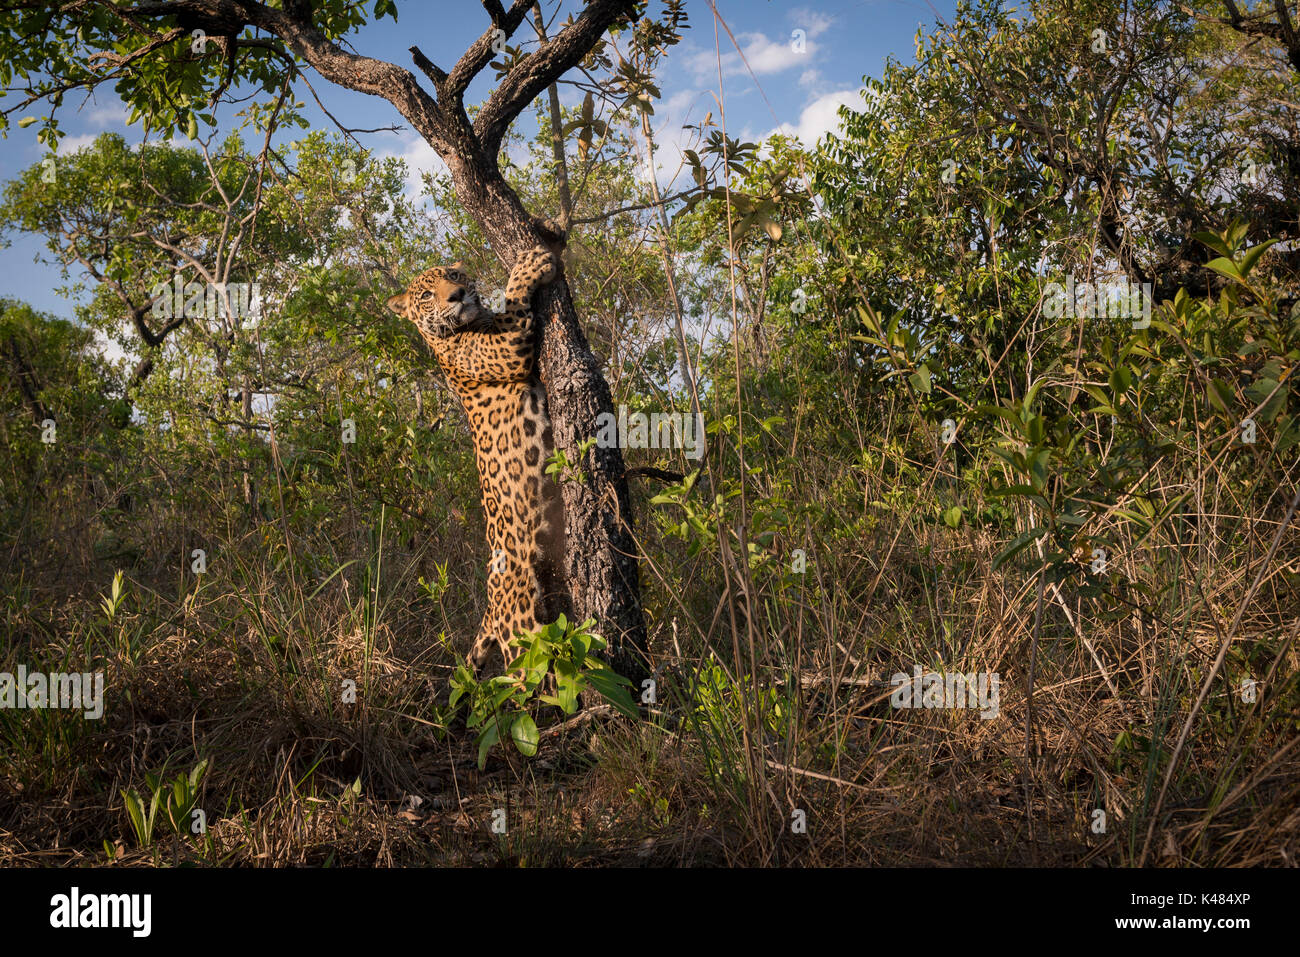 A Jaguar caught in the act of marking its territory on a small cerrado tree in Central Brazil Stock Photo